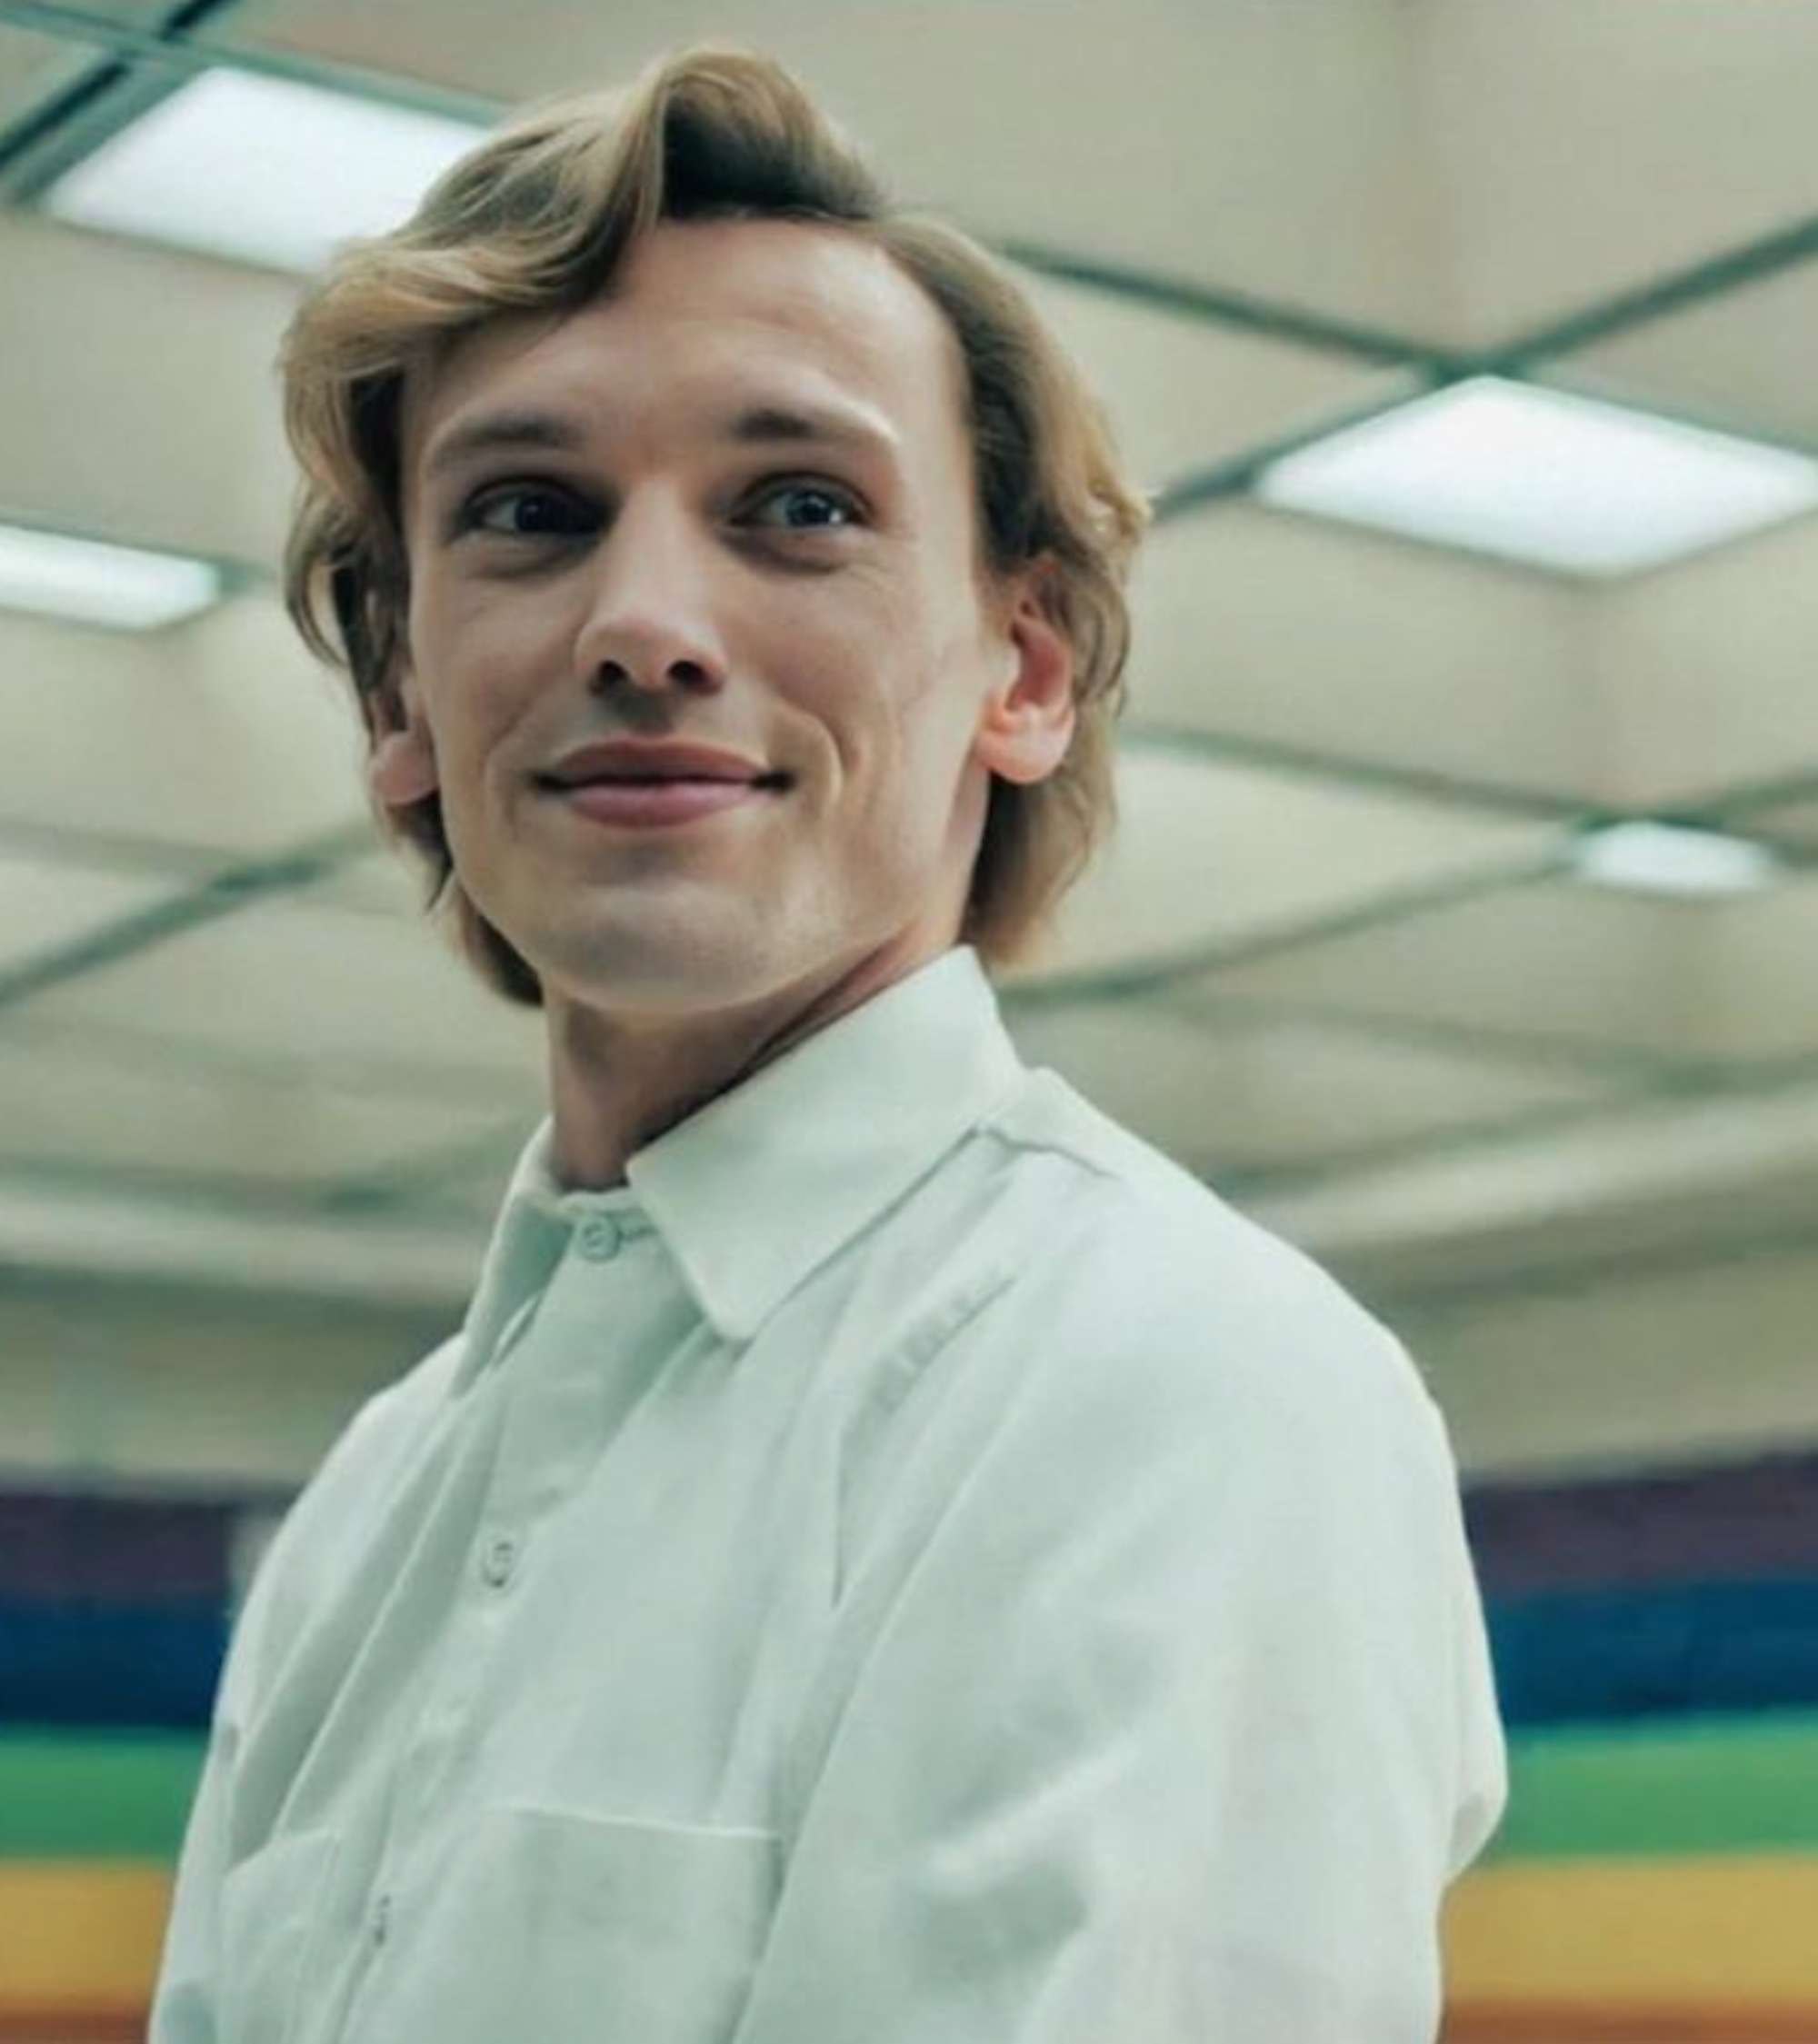 Jamie Campbell Bower Biography: Age, Net Worth, Parents, Spouse, Height, Instagram, Songs, Movies, Wiki